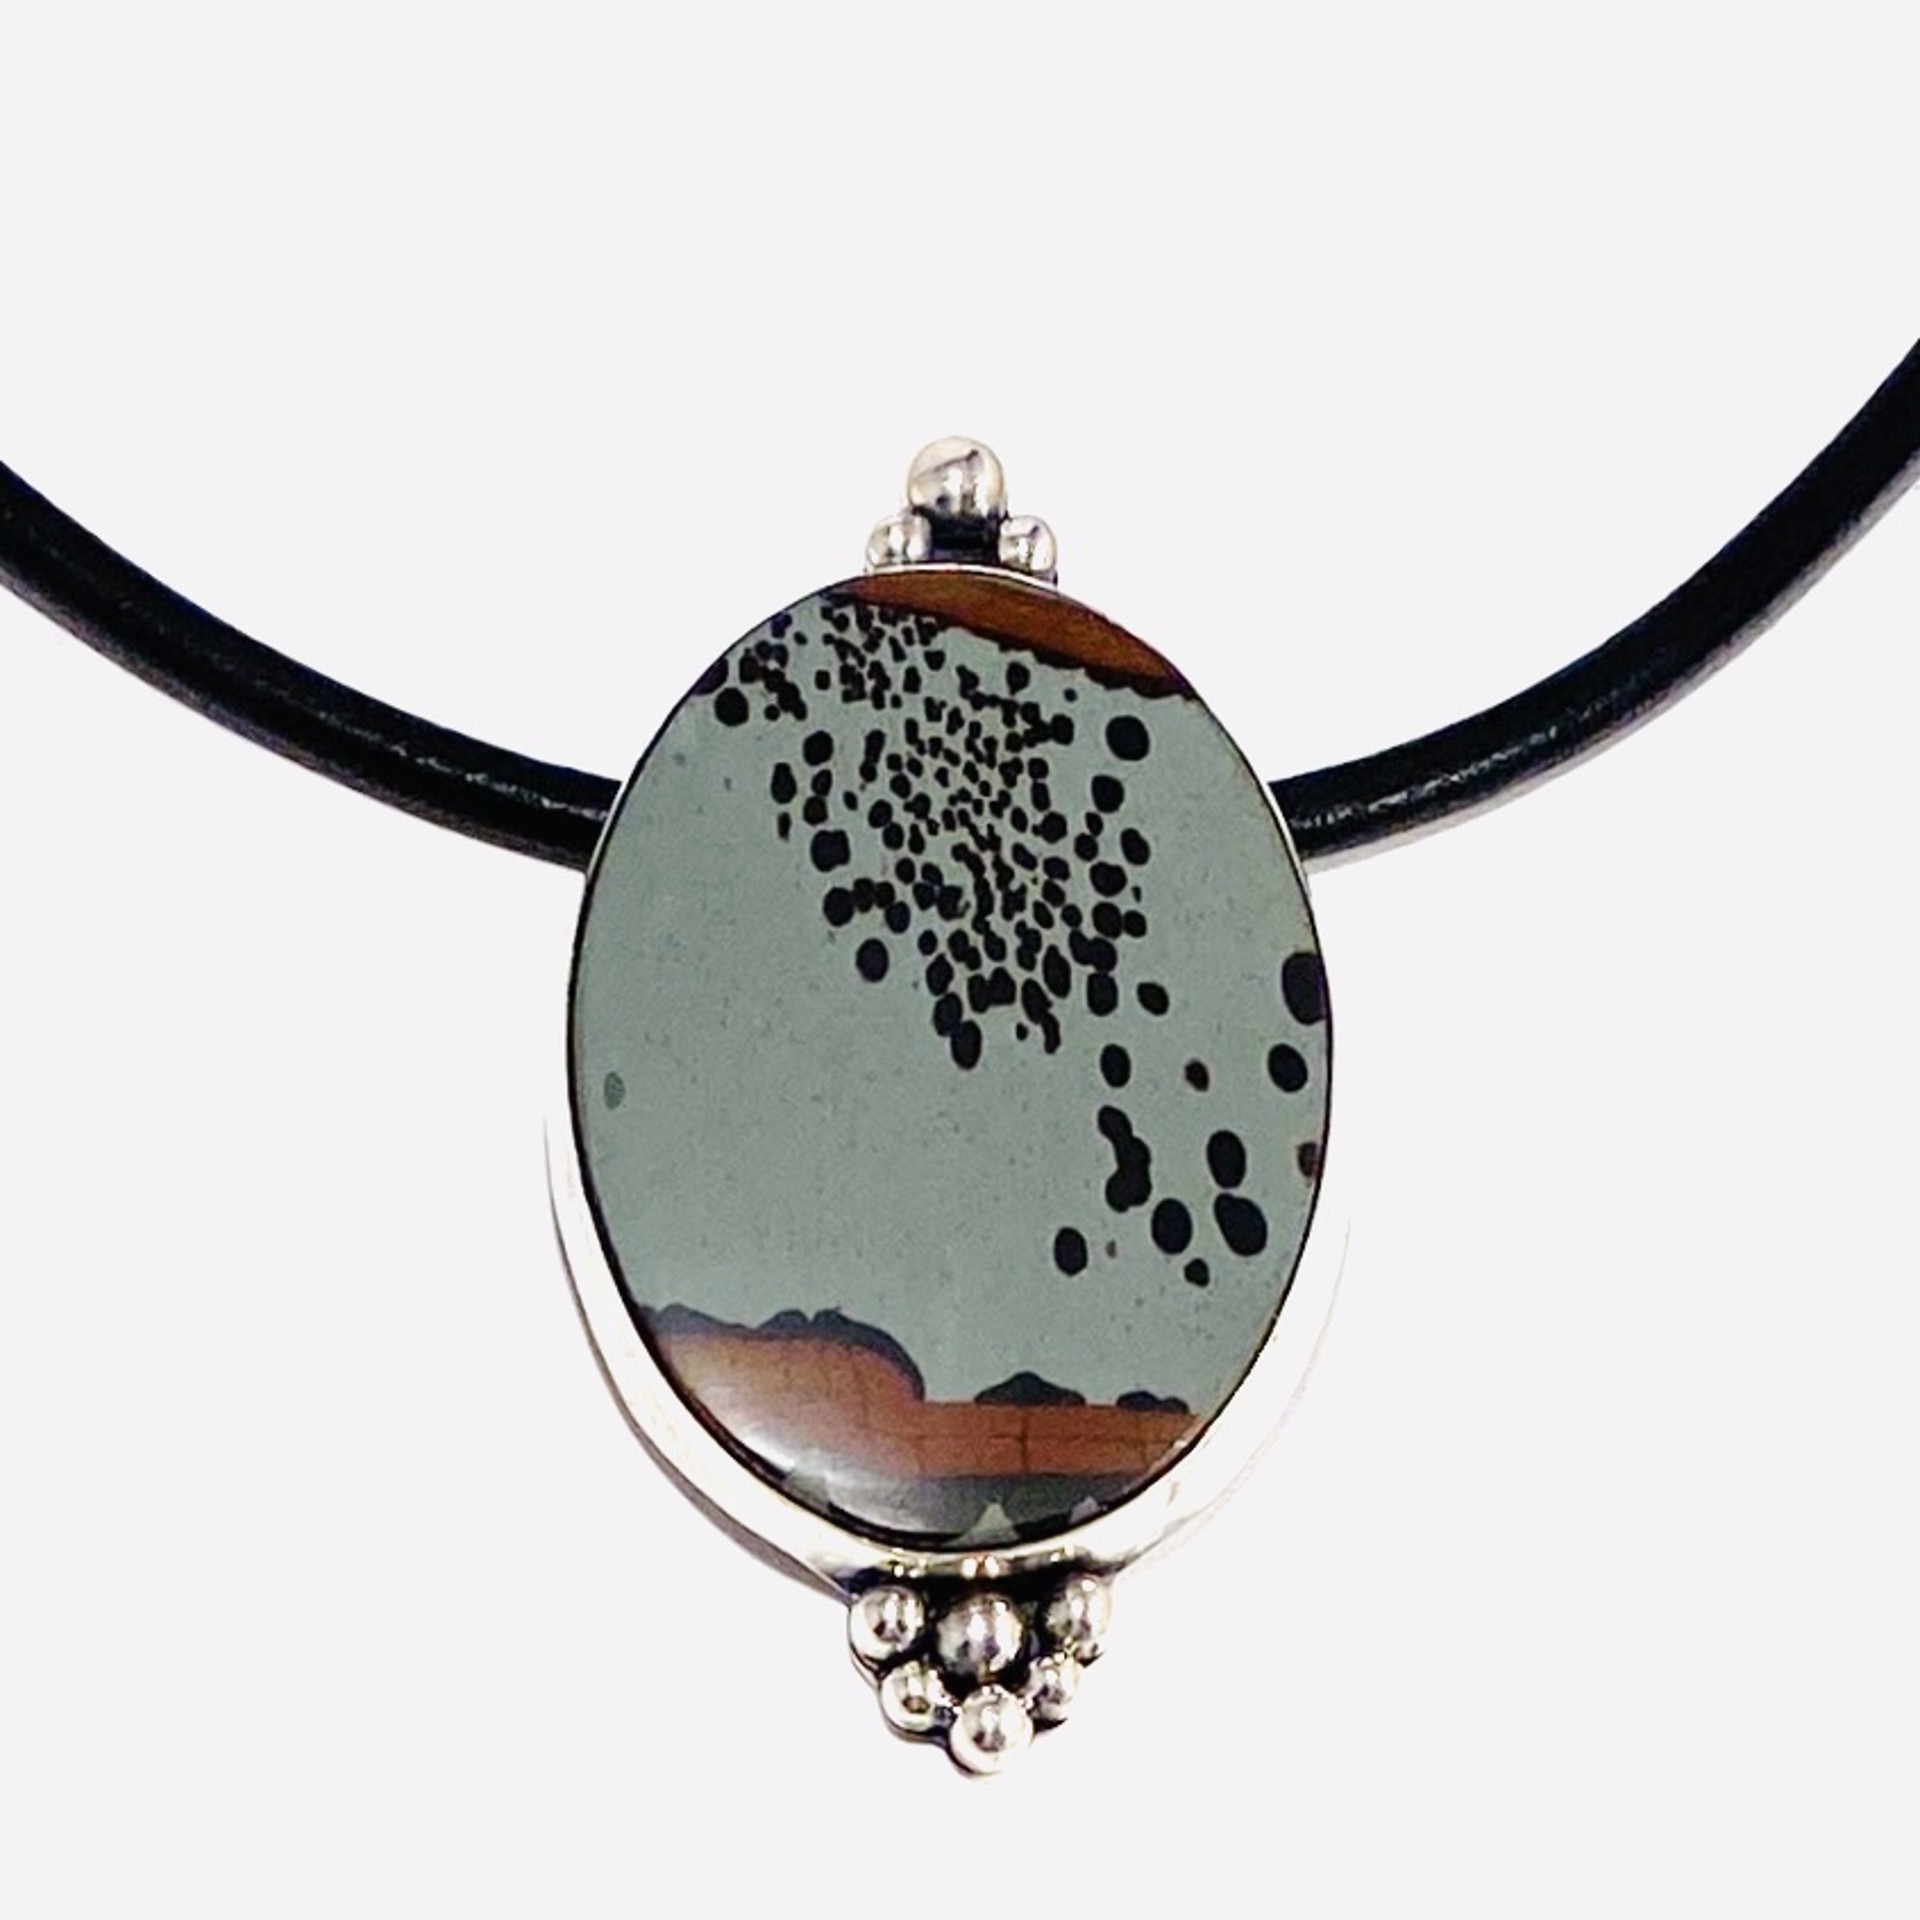 AB23-36 Large Oval “Rain On The Rockies” Indian Paint Jasper Inlay Bead Accent Pendant on Leather cord by Anne Bivens